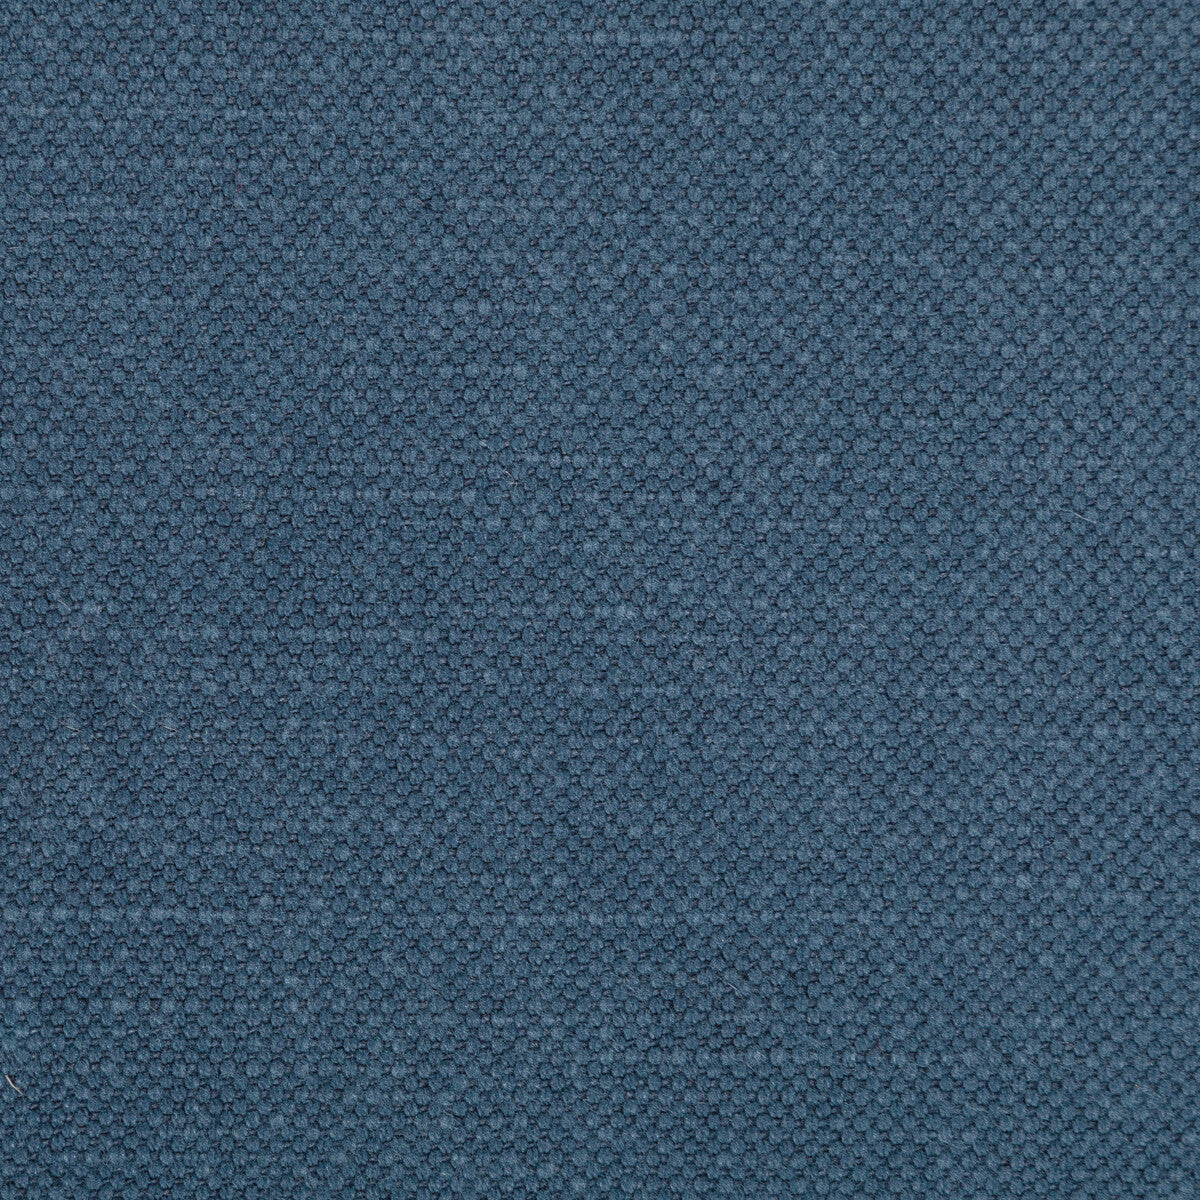 Carson fabric in midnight blue color - pattern 36282.550.0 - by Kravet Basics